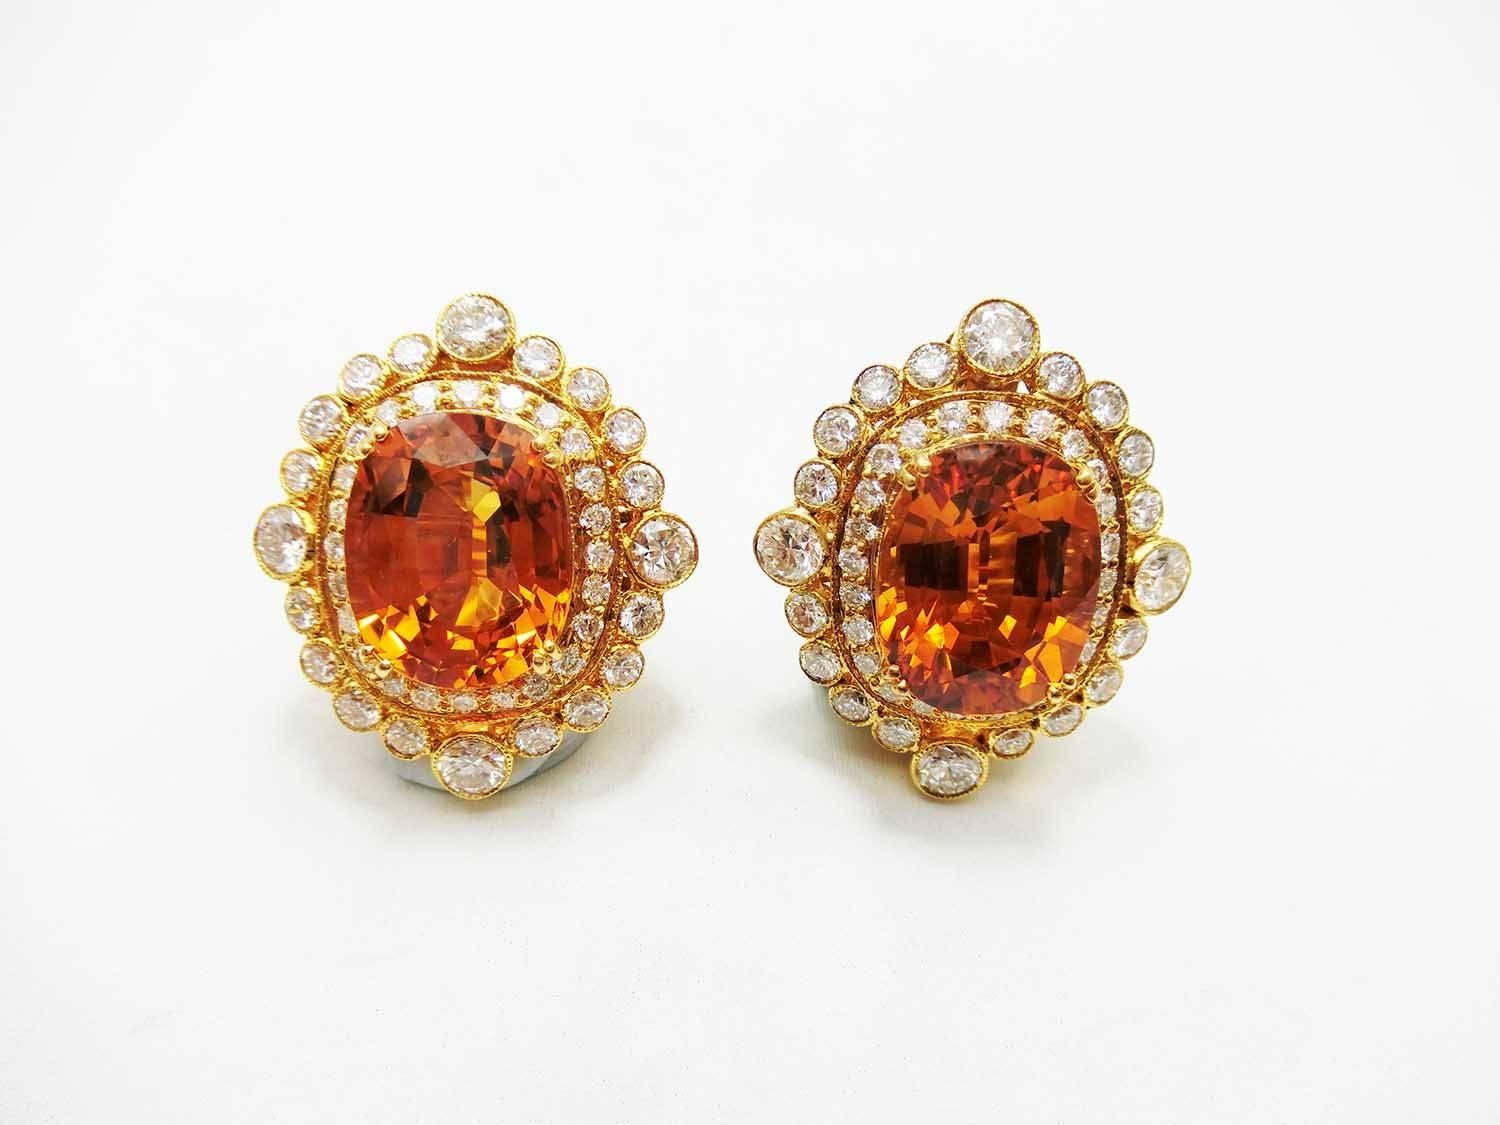 Renaissance 7.69 and 7.59 Carat Cushion Cut Yellow Sapphire Diamond Gold Cluster Earrings For Sale